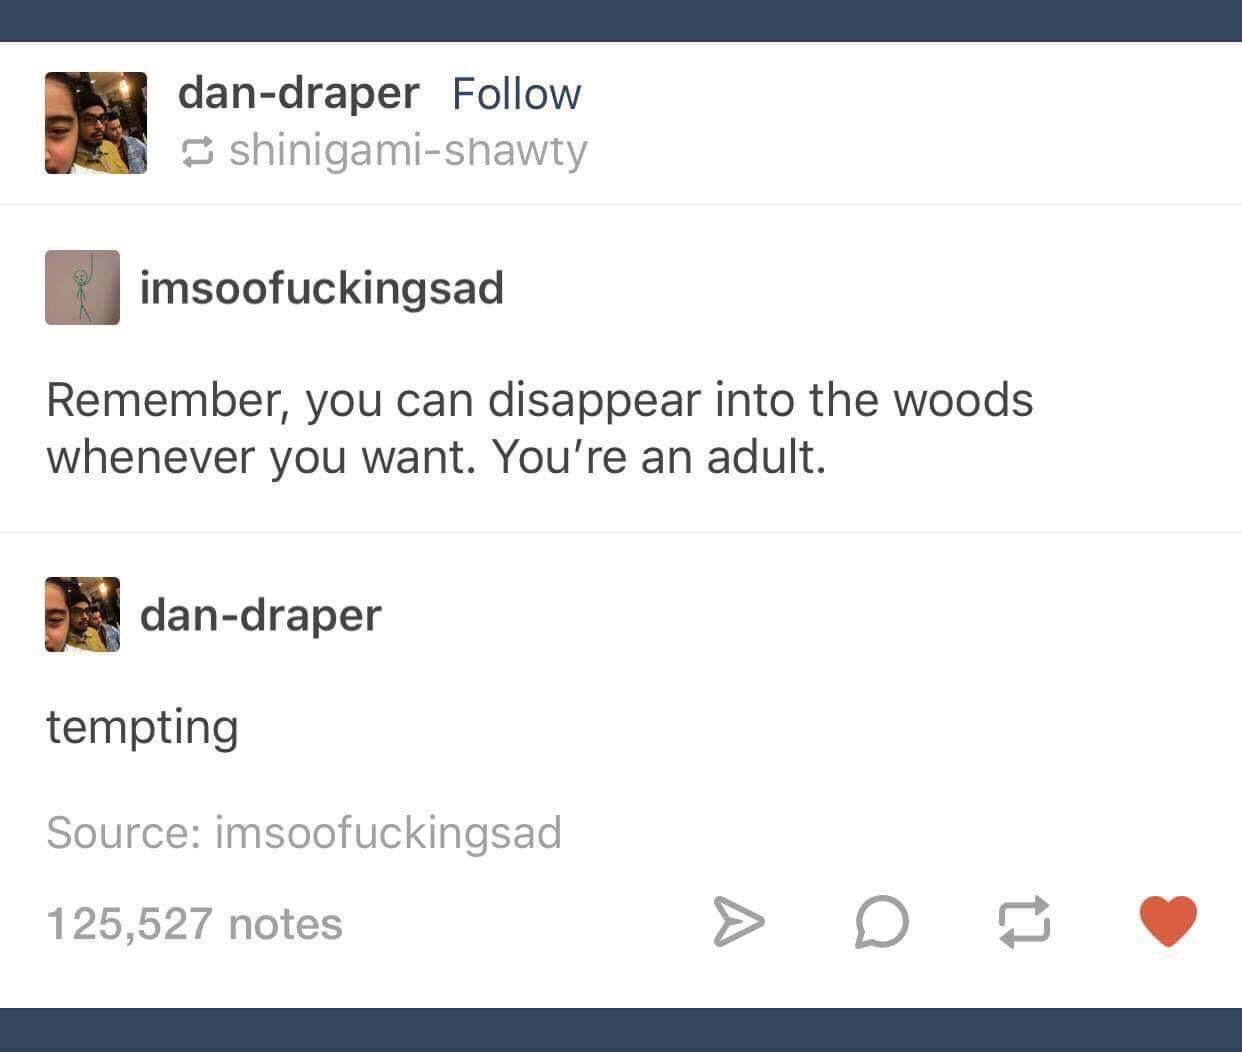 memes - document - dandraper shinigamishawty rimsoofuckingsad Remember, you can disappear into the woods whenever you want. You're an adult. dandraper tempting Source imsoofuckingsad 125,527 notes